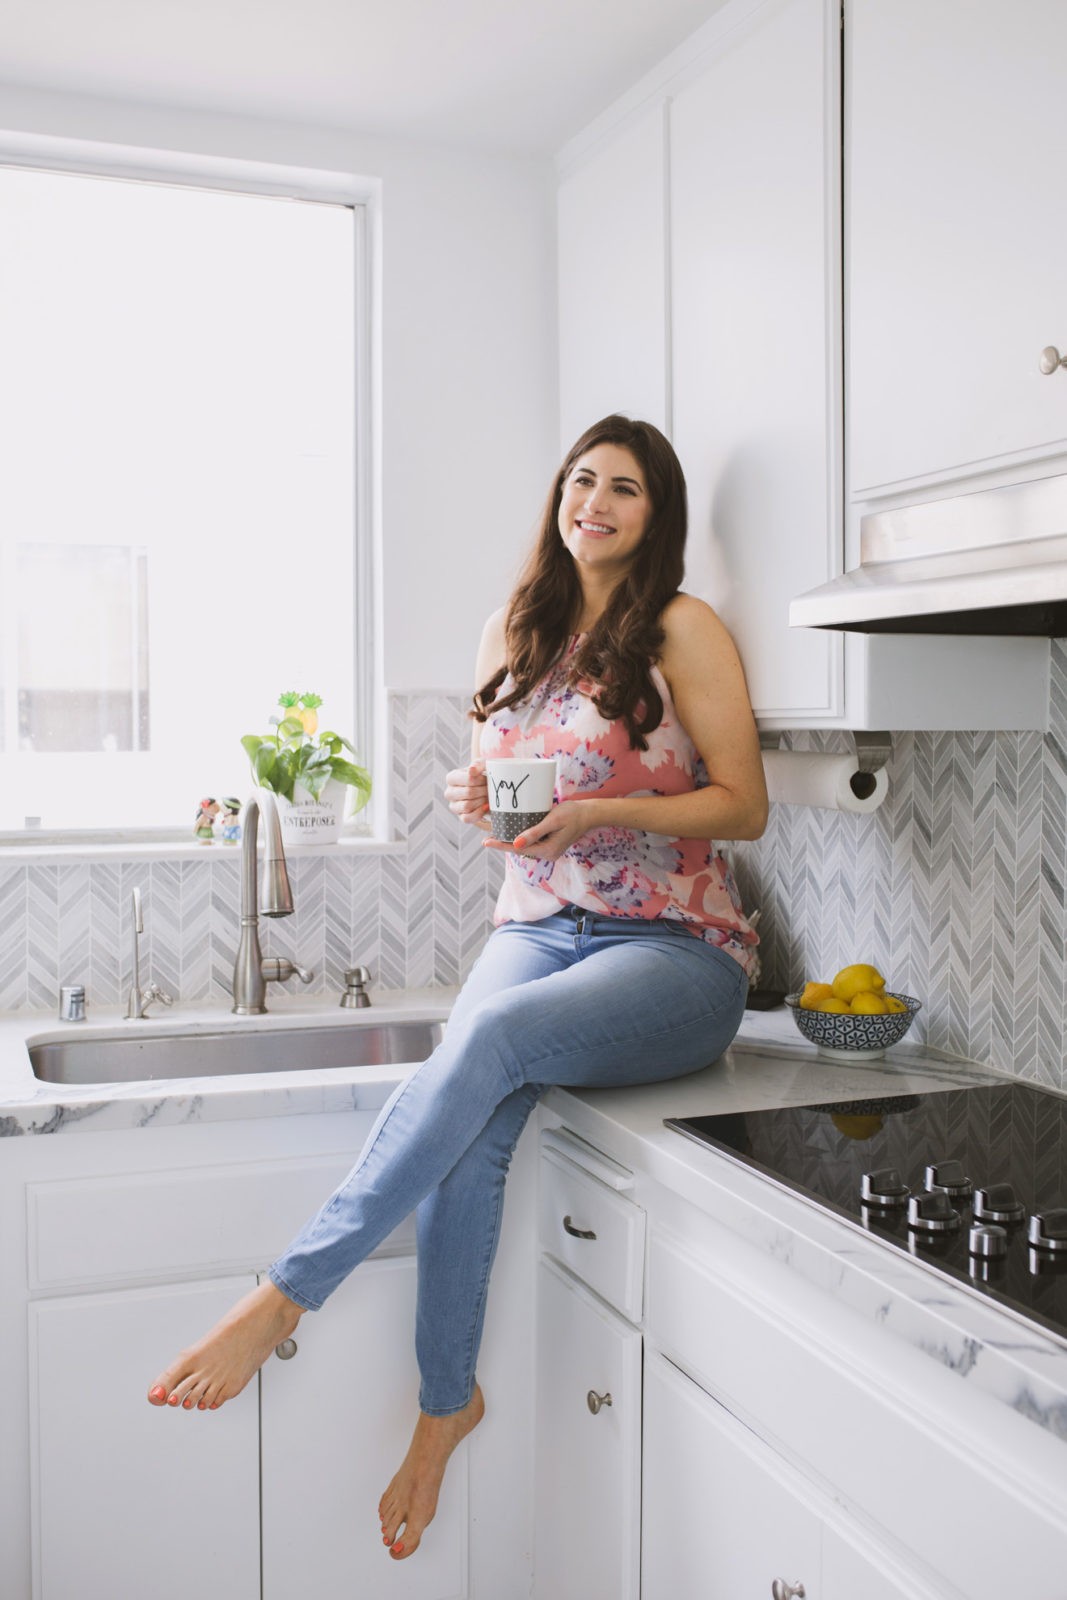 The Best Daily Morning Routine to Start Your Day featured by popular Lifestyle Influencer Laura Lily